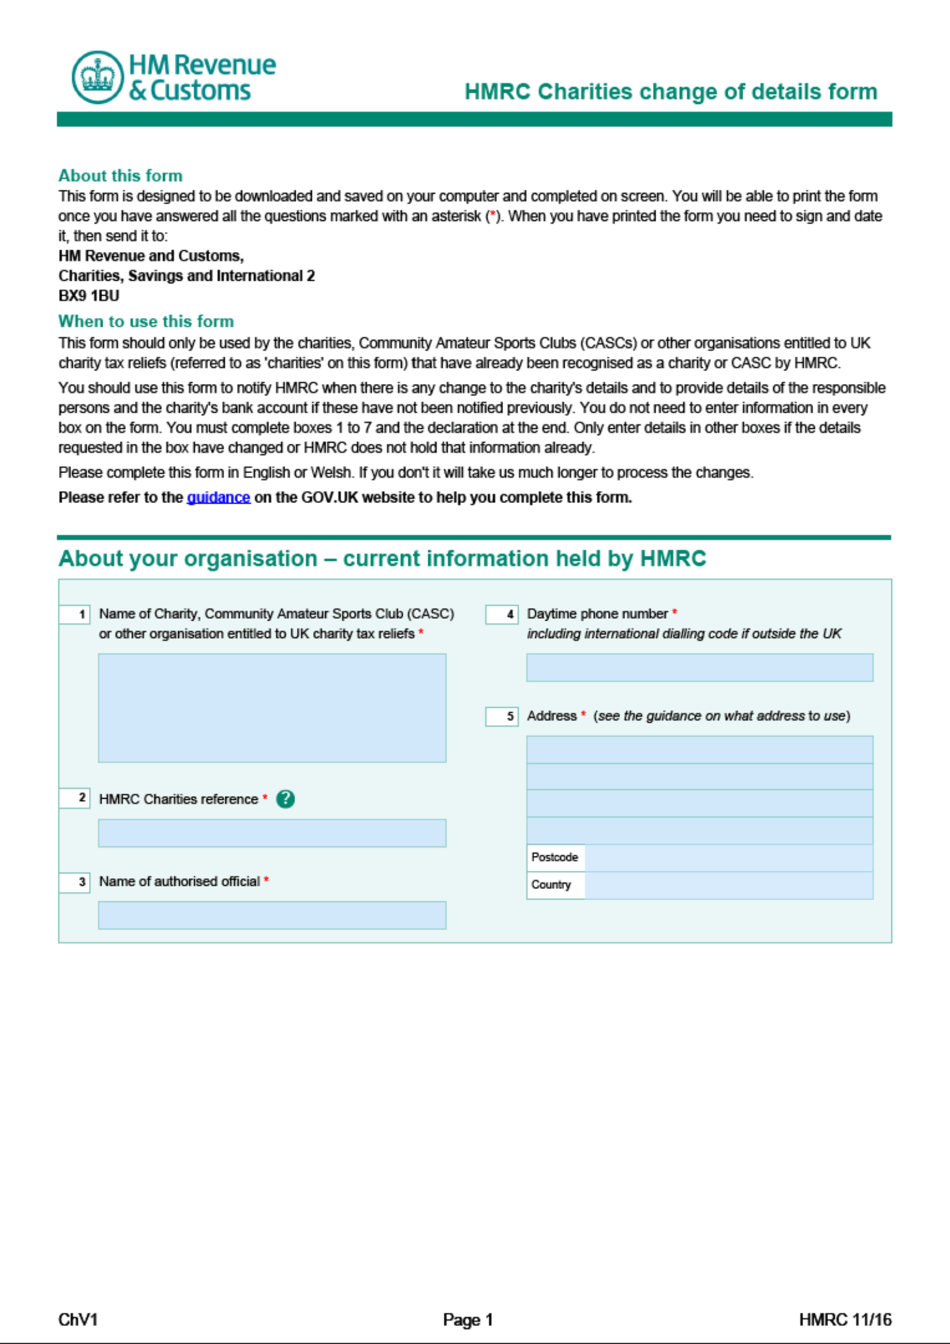 Form ChV1 Hmrc Charities Change of Details Form - United Kingdom, Page 1